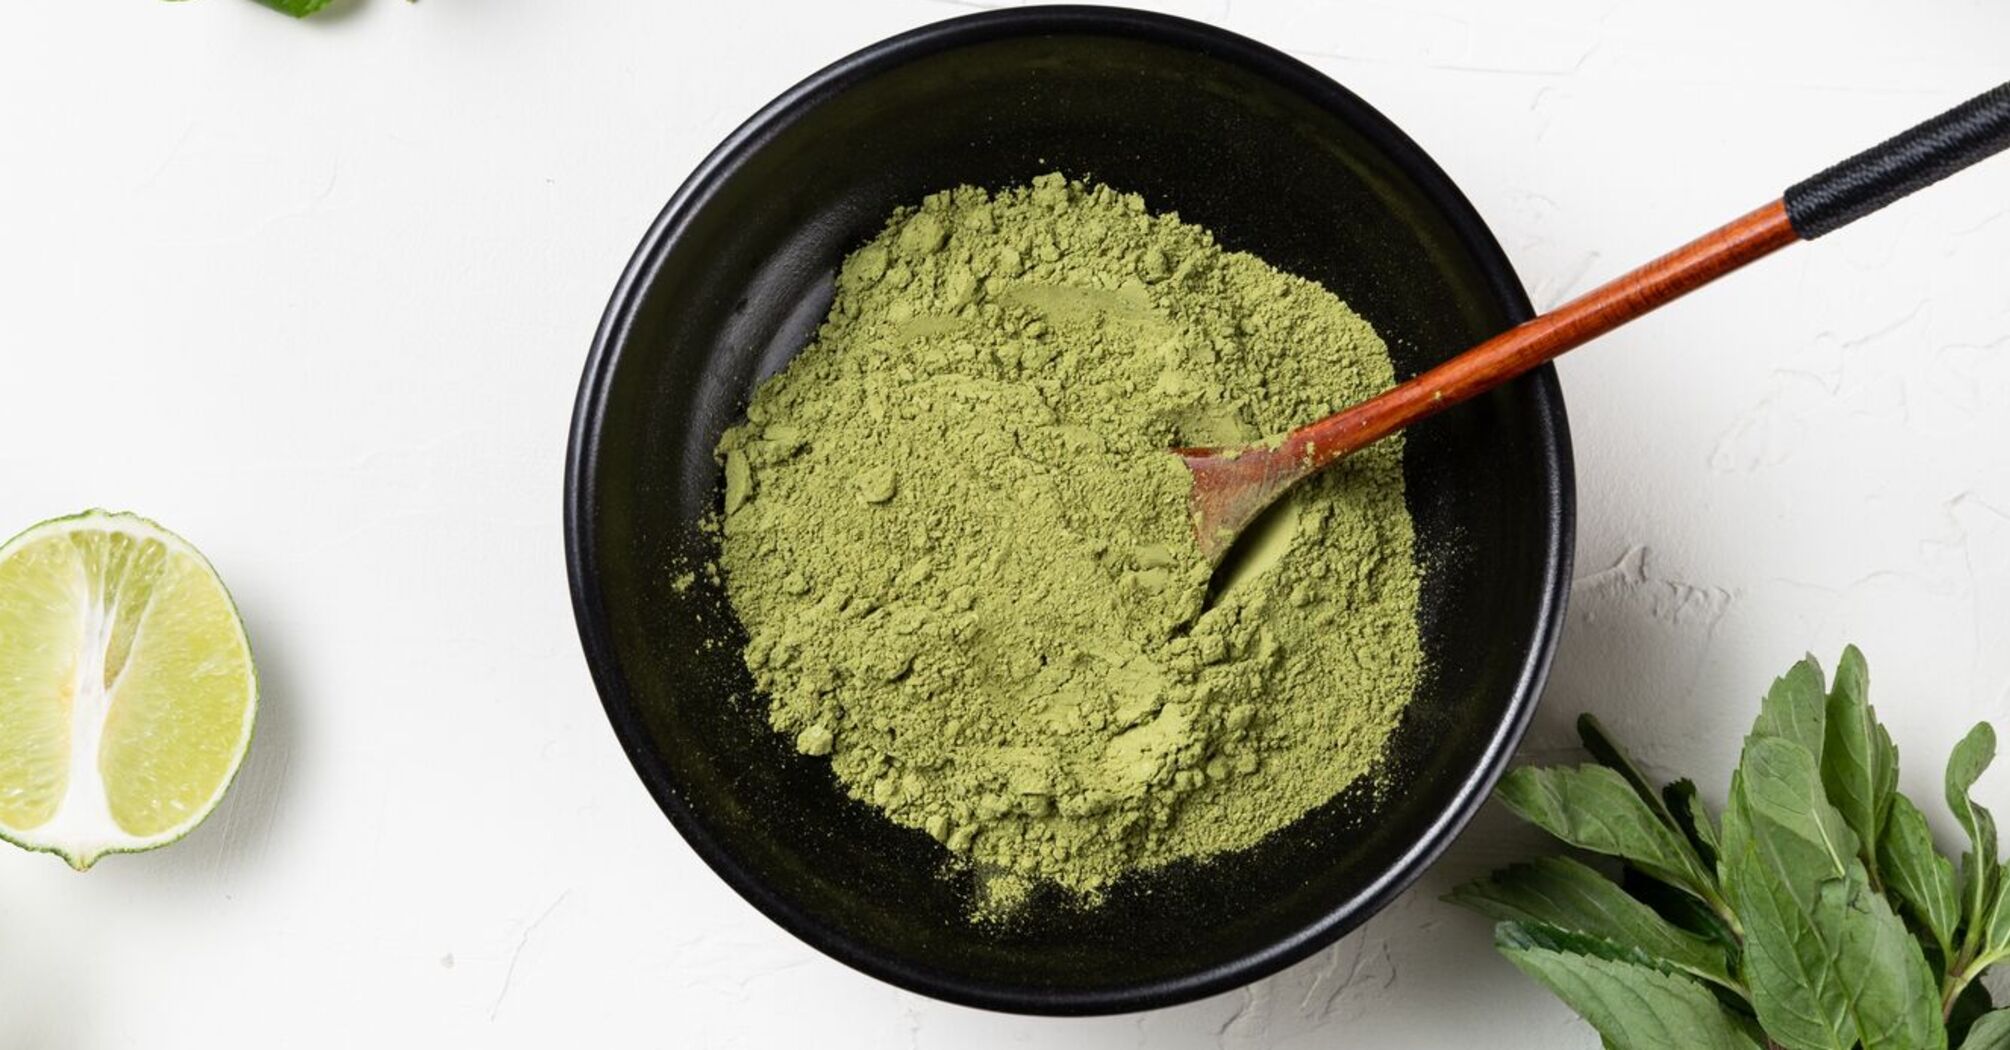 Natural and flavorful dill seasoning that will create a summer mood all year long